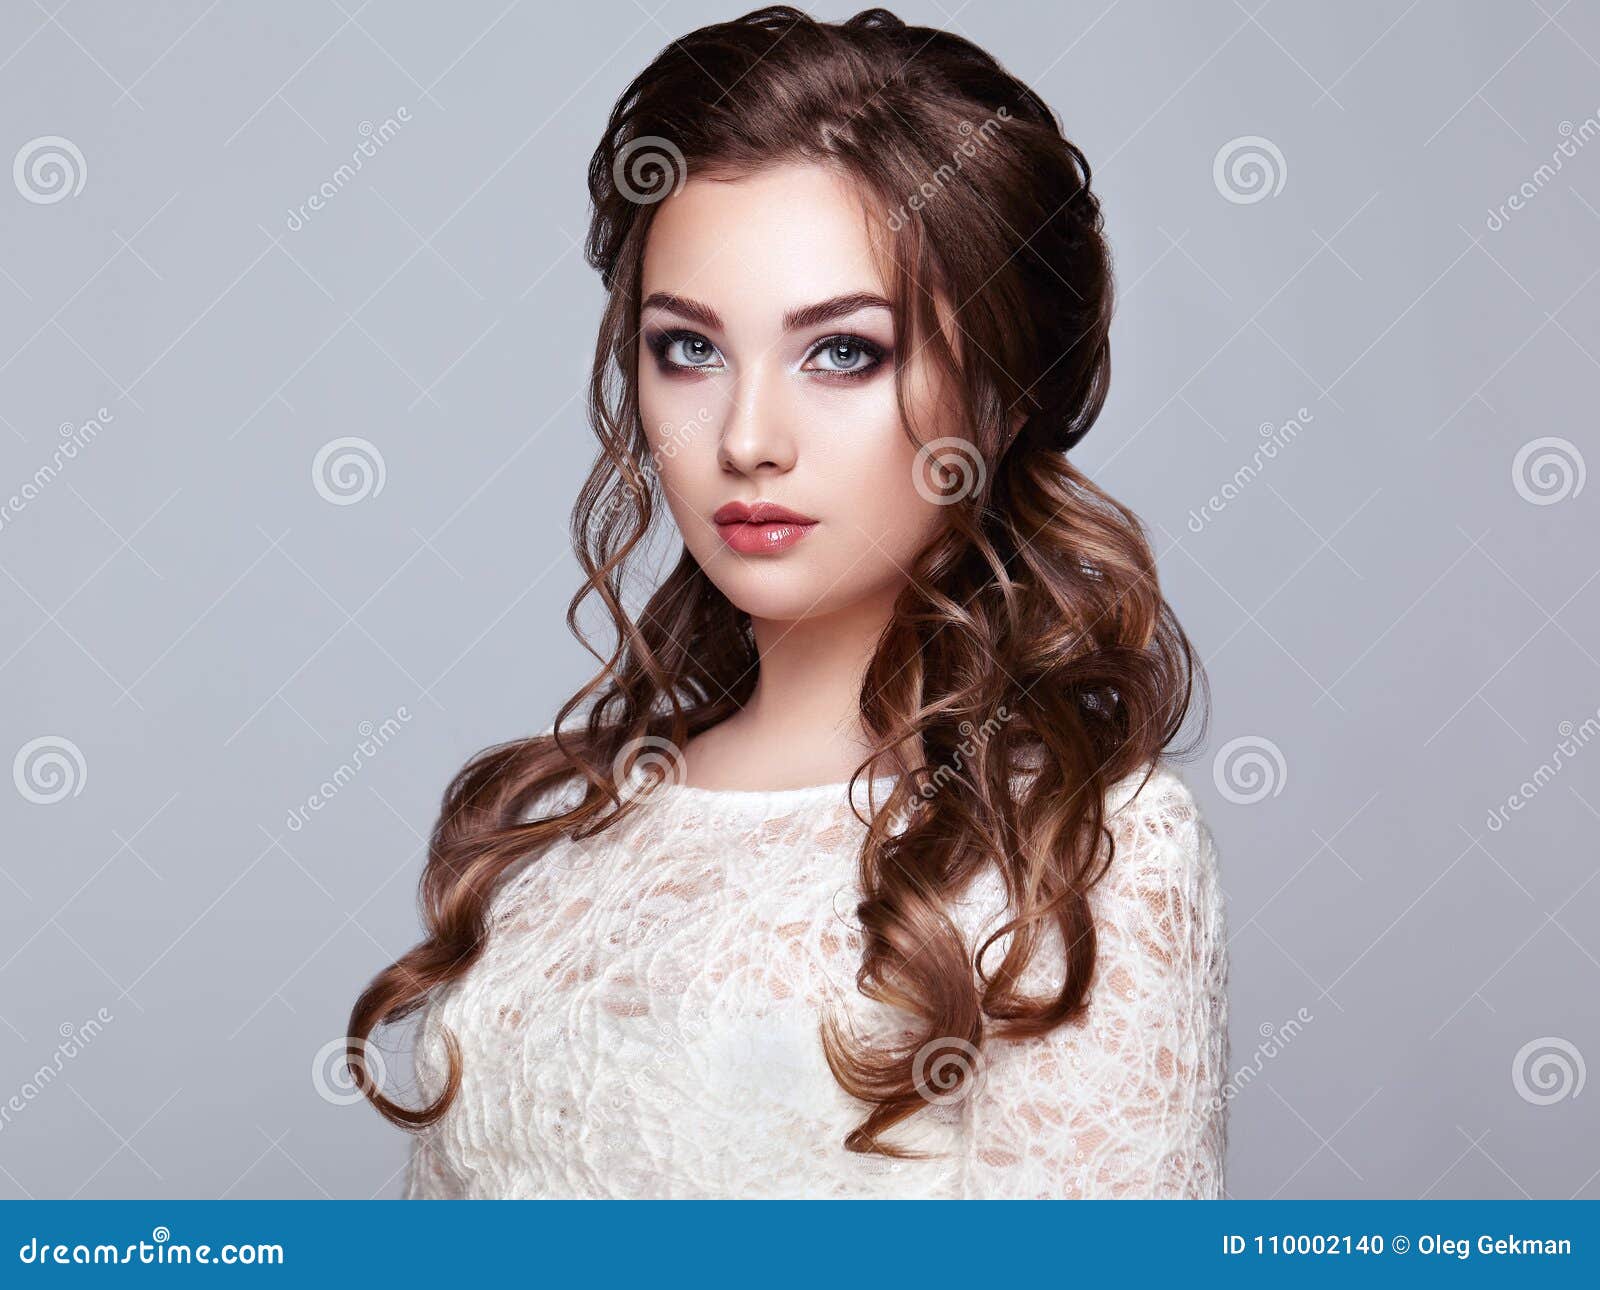 brunette woman with long and shiny curly hair